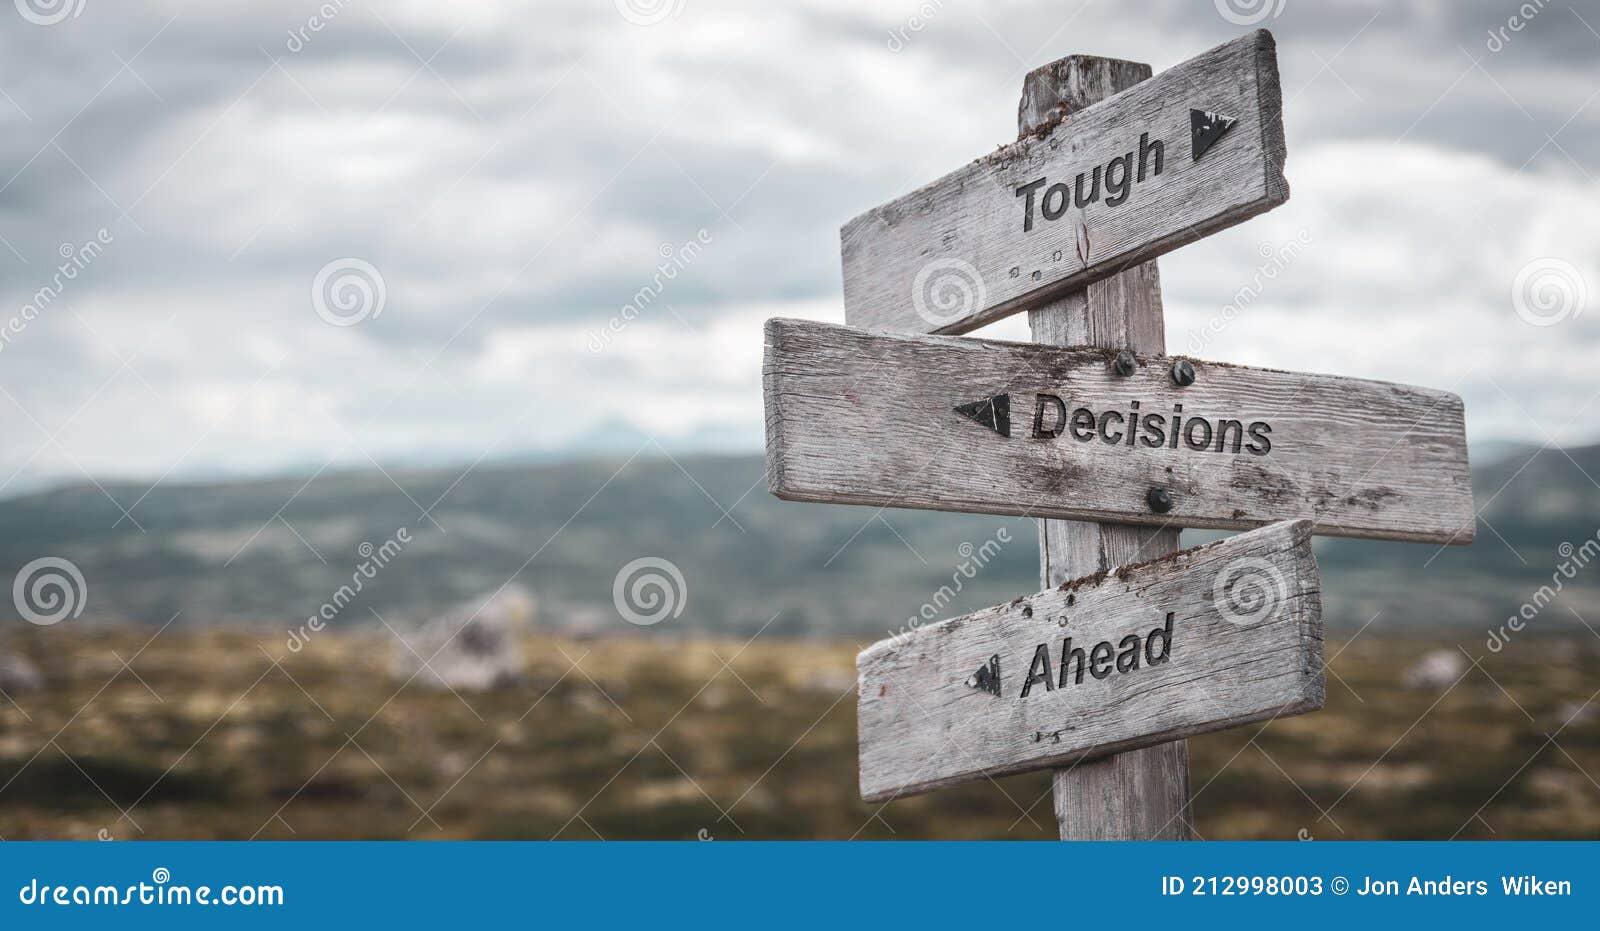 tough decisions ahead text engraved on wooden signpost outdoors in nature.